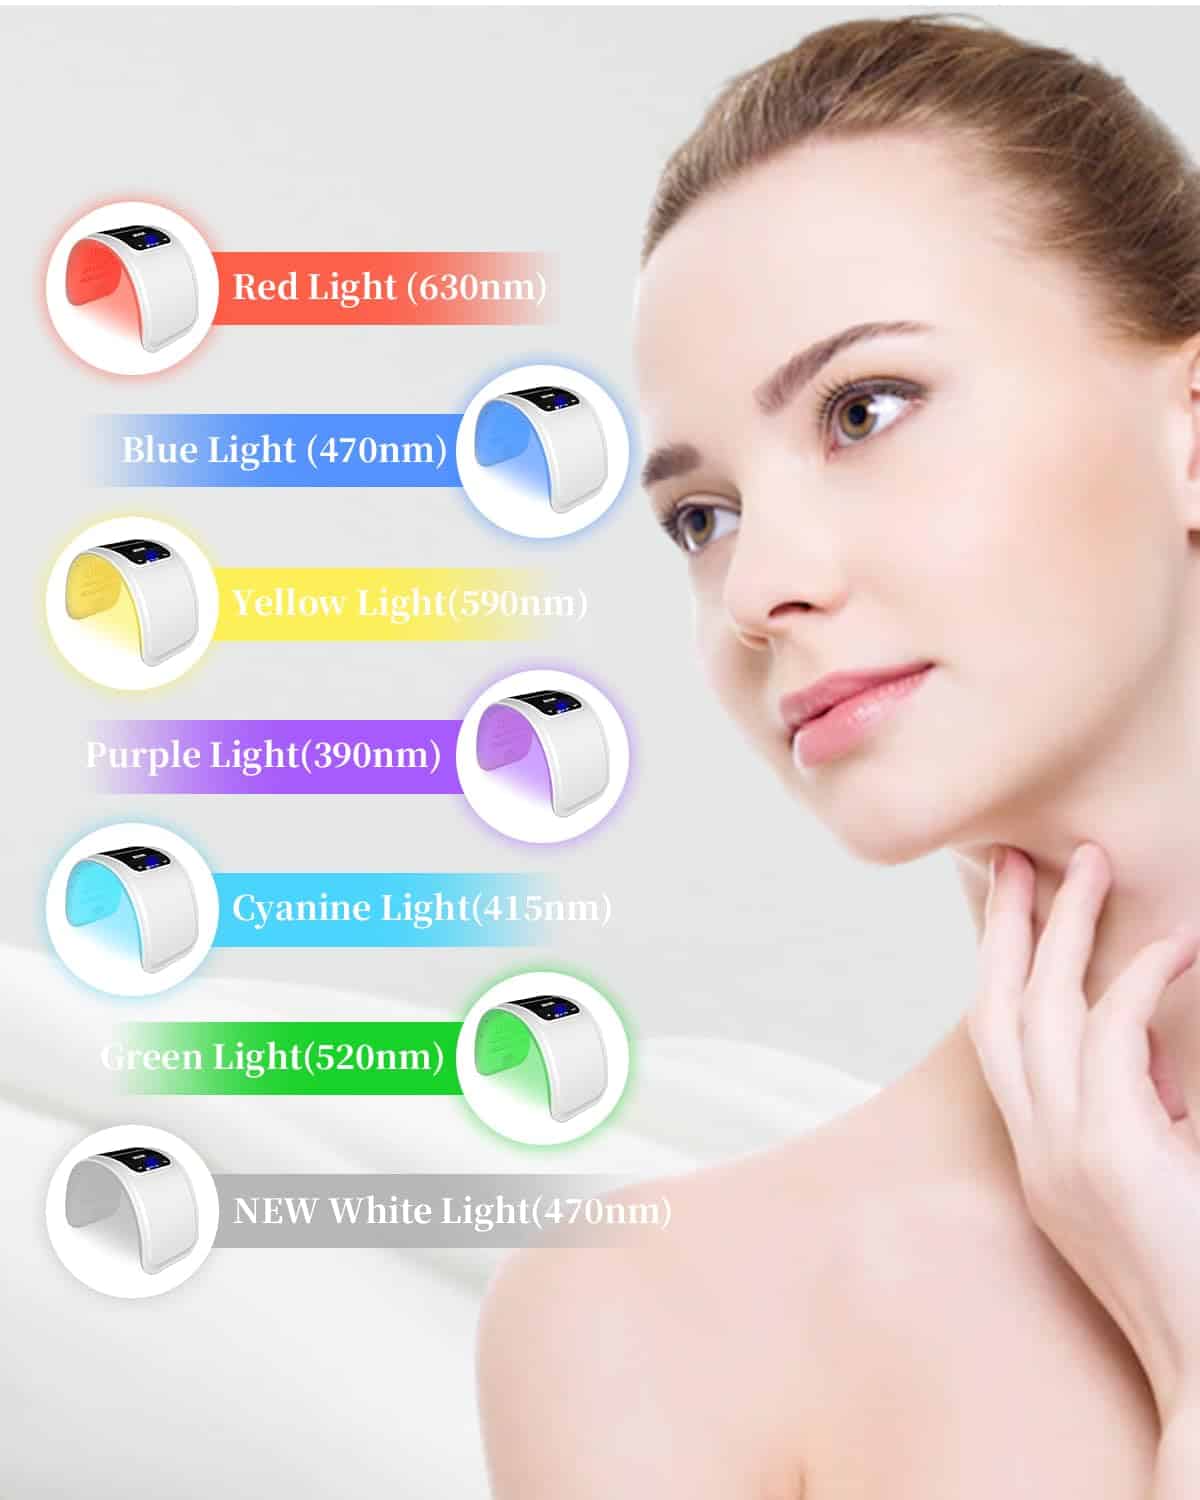 Beuwe Red-Light-Therapy-Mask, Led Light Therapy for Face, 7 Colors Led Face Mask Facial Led Light Therapy Tool Skin Care Equipment at Home, Facial Neck Body Hand Beauty Mask